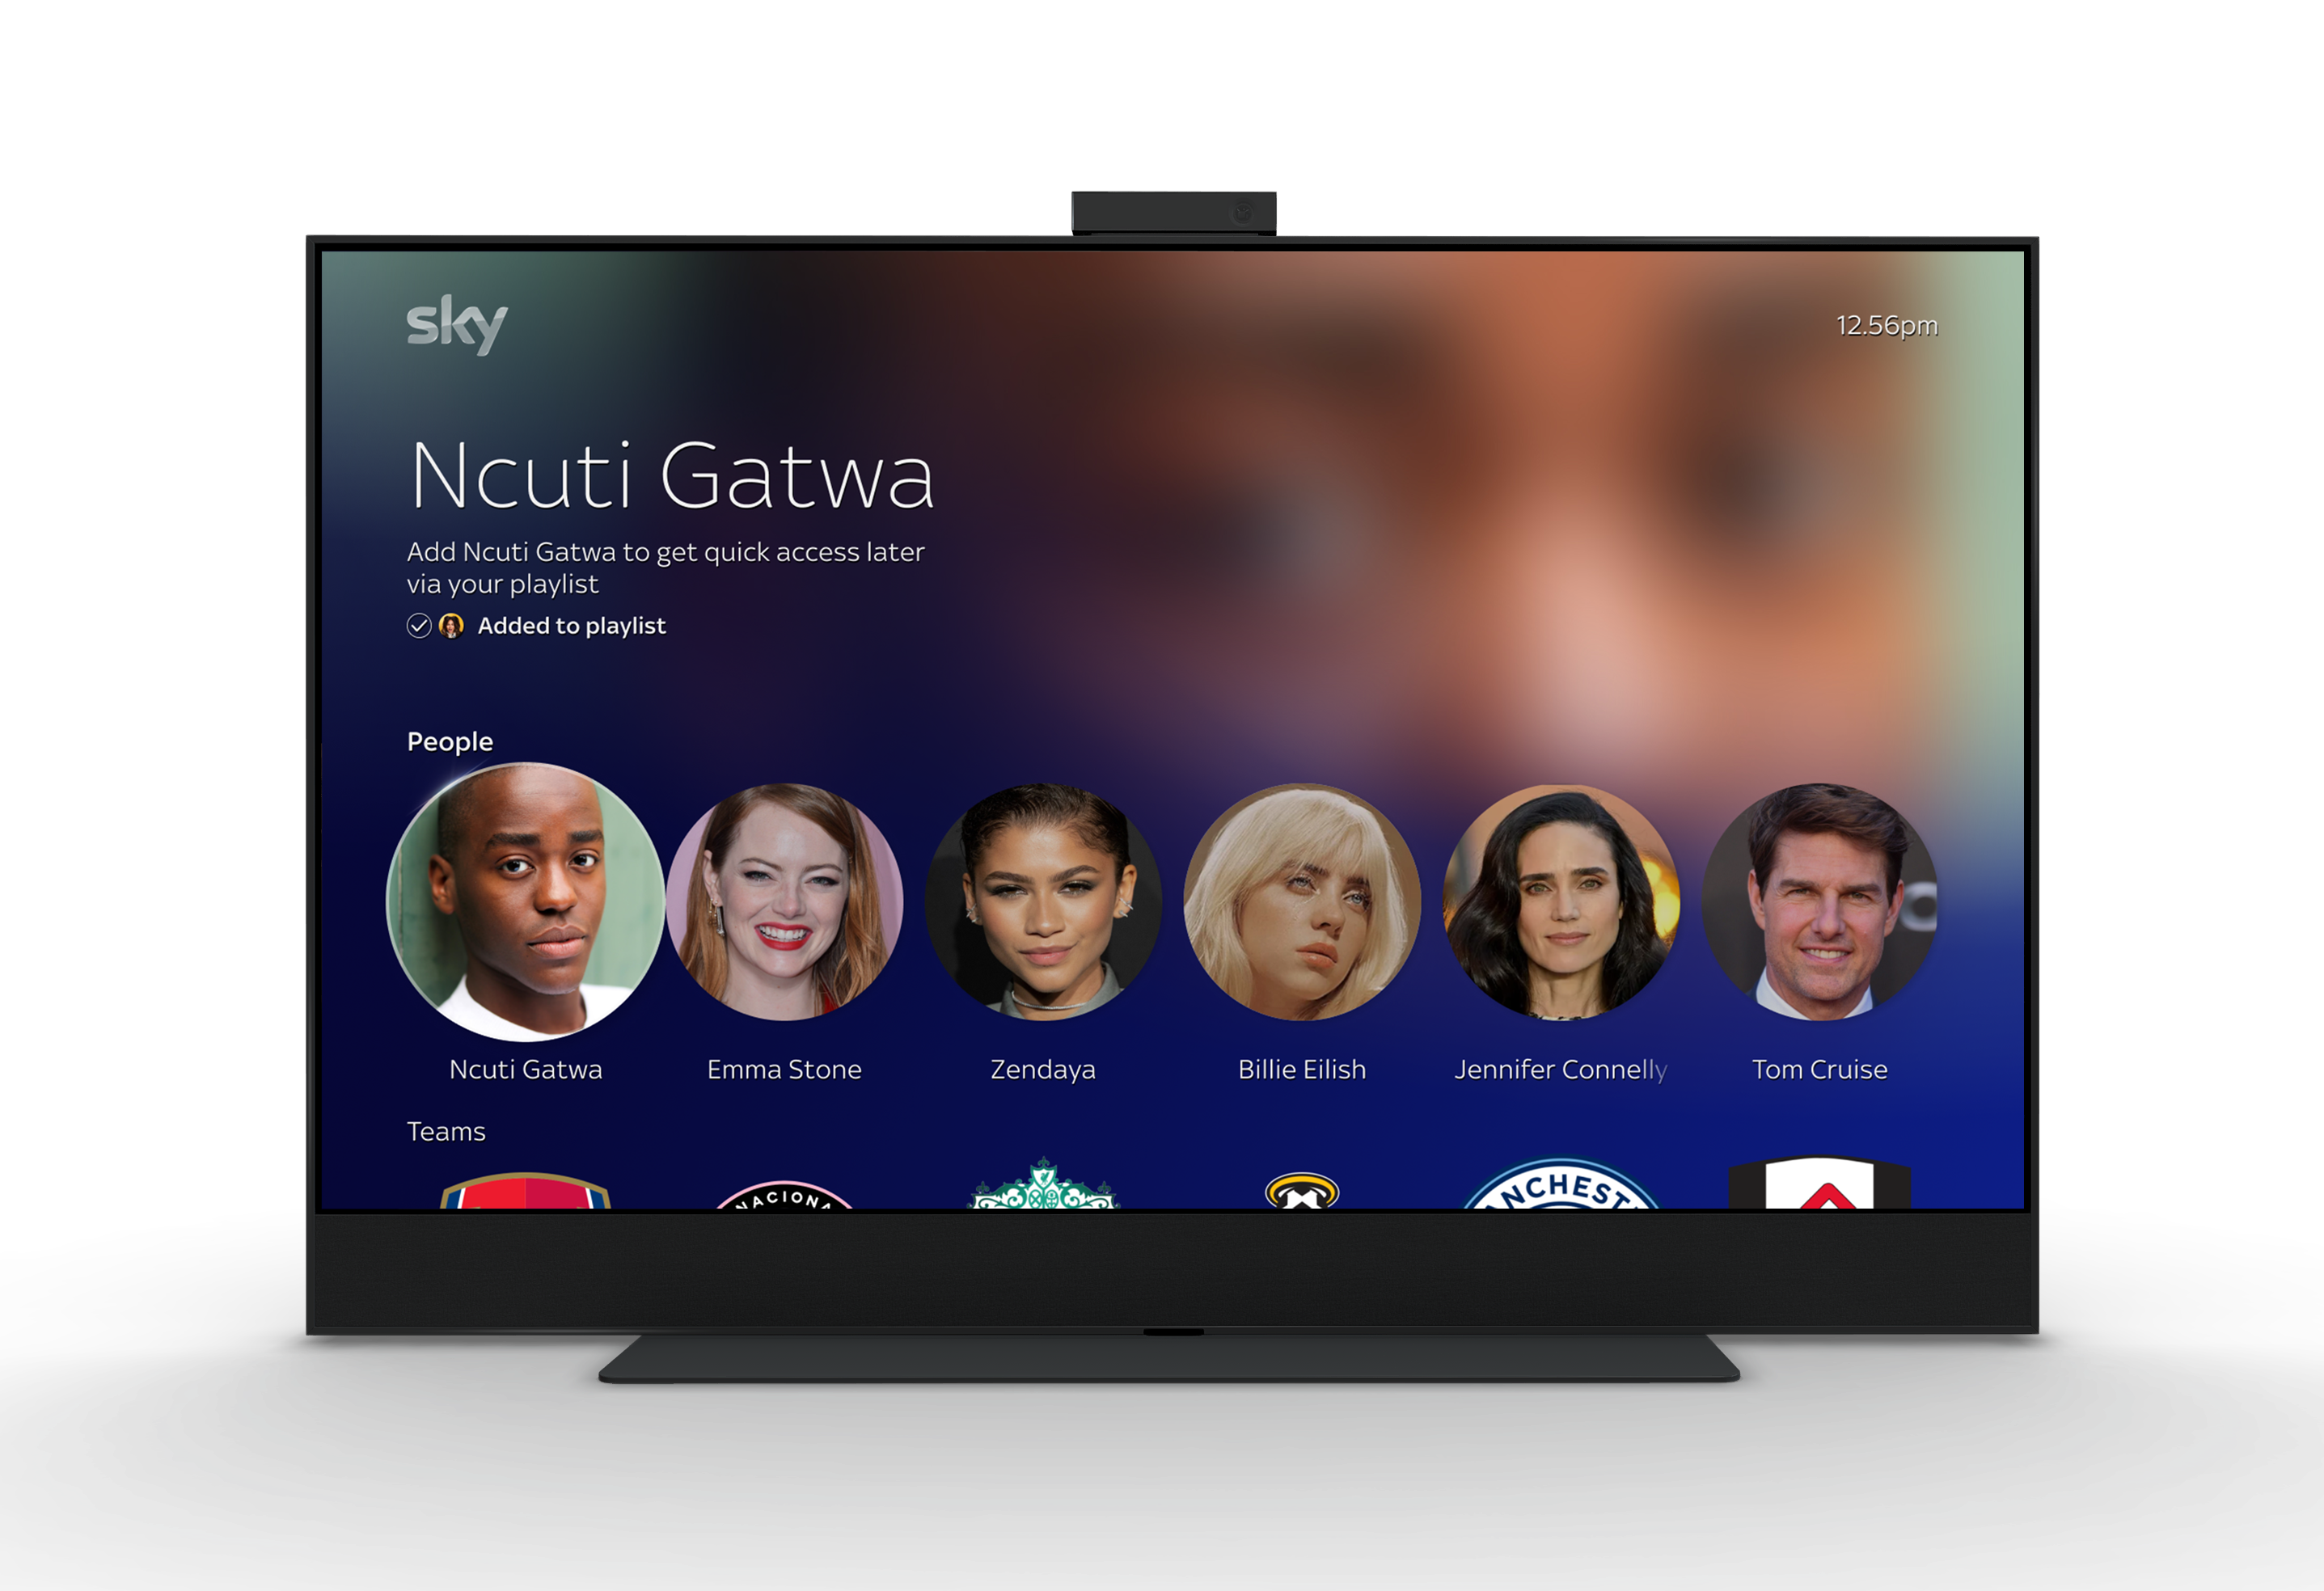 Sky TV entertainmentOS menu with people and sports teams listed to follow specific actors, directors, and writers